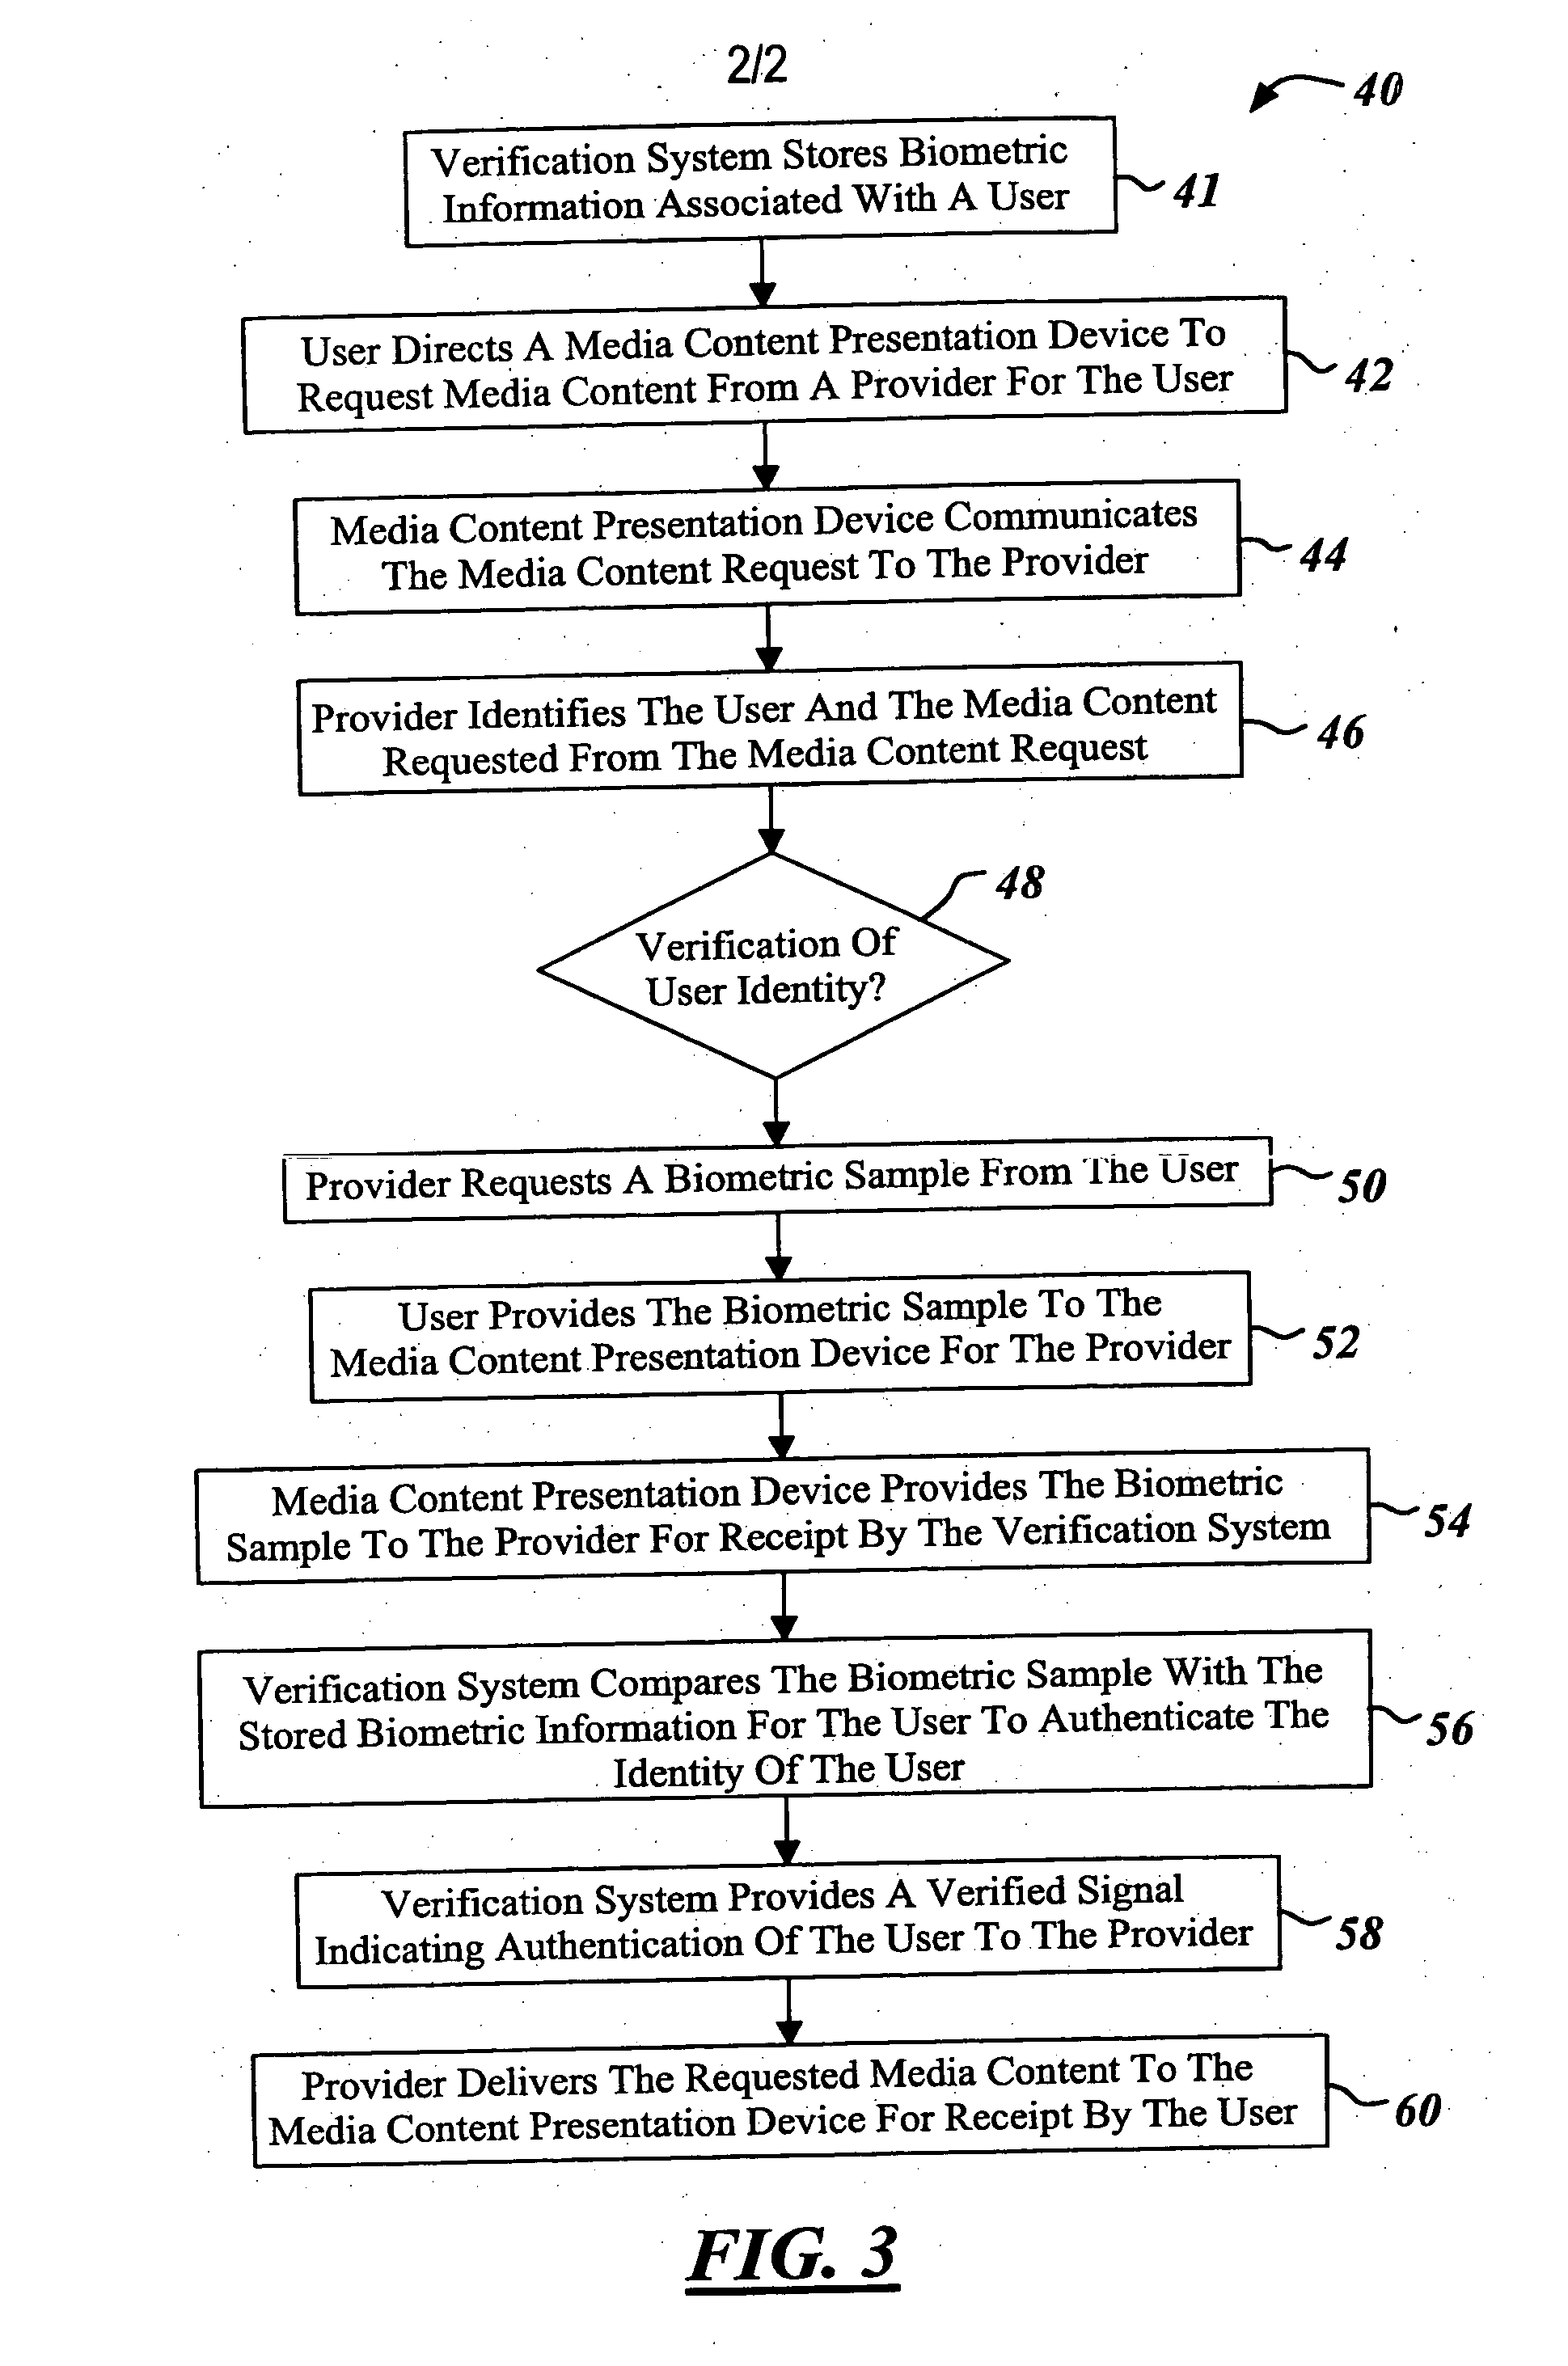 Method and system for biometric based access control of media content presentation devices